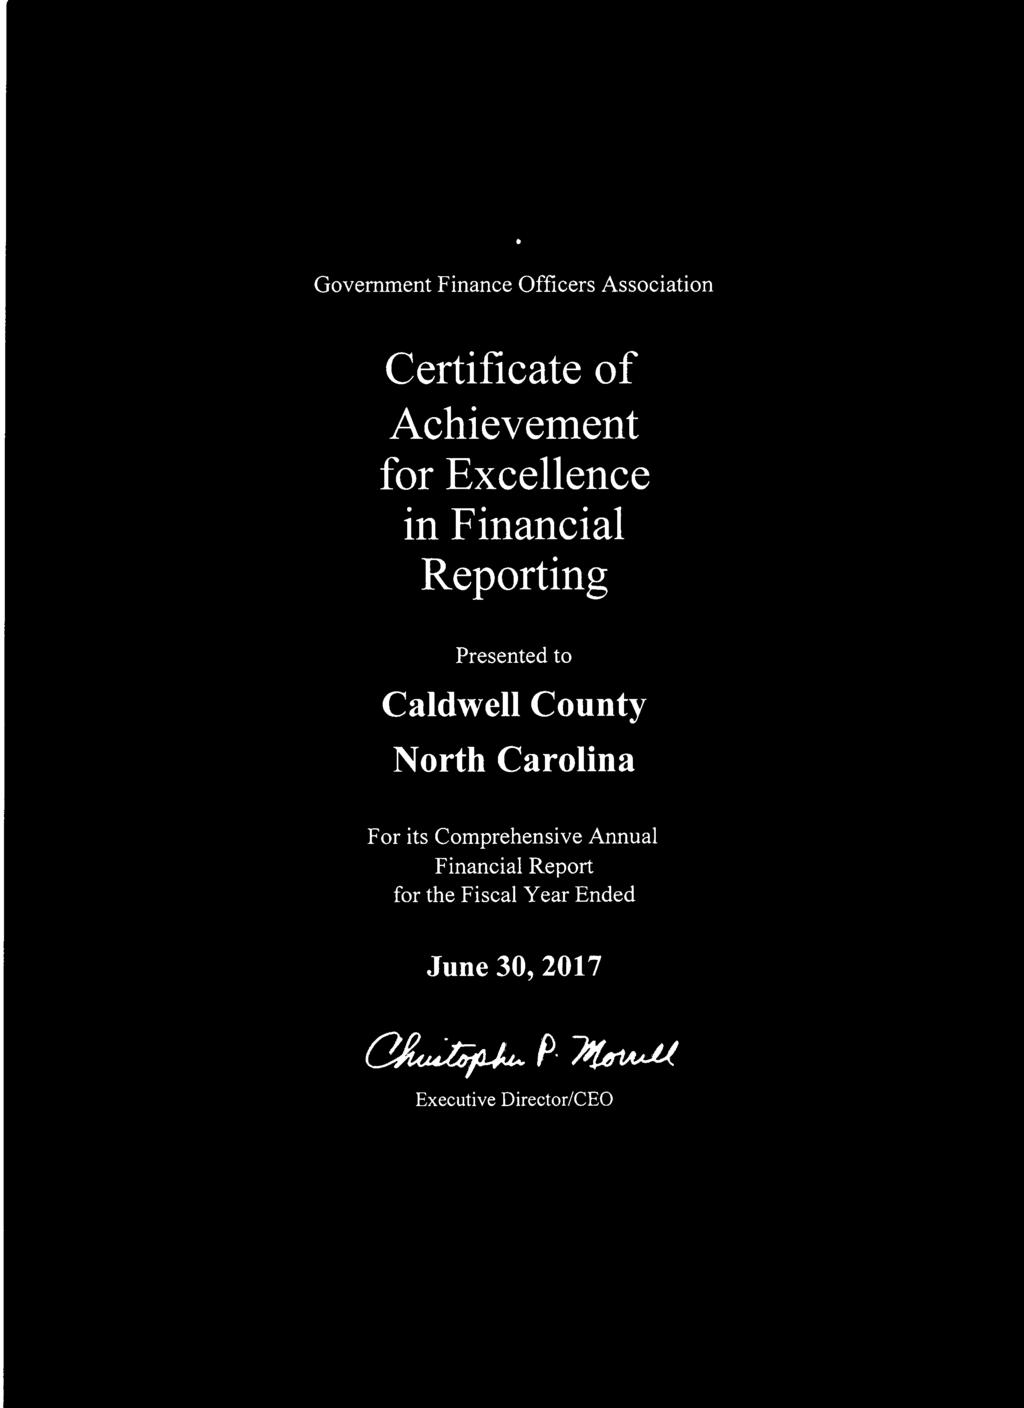 Caldwell County North Carolina For its Comprehensive Annual